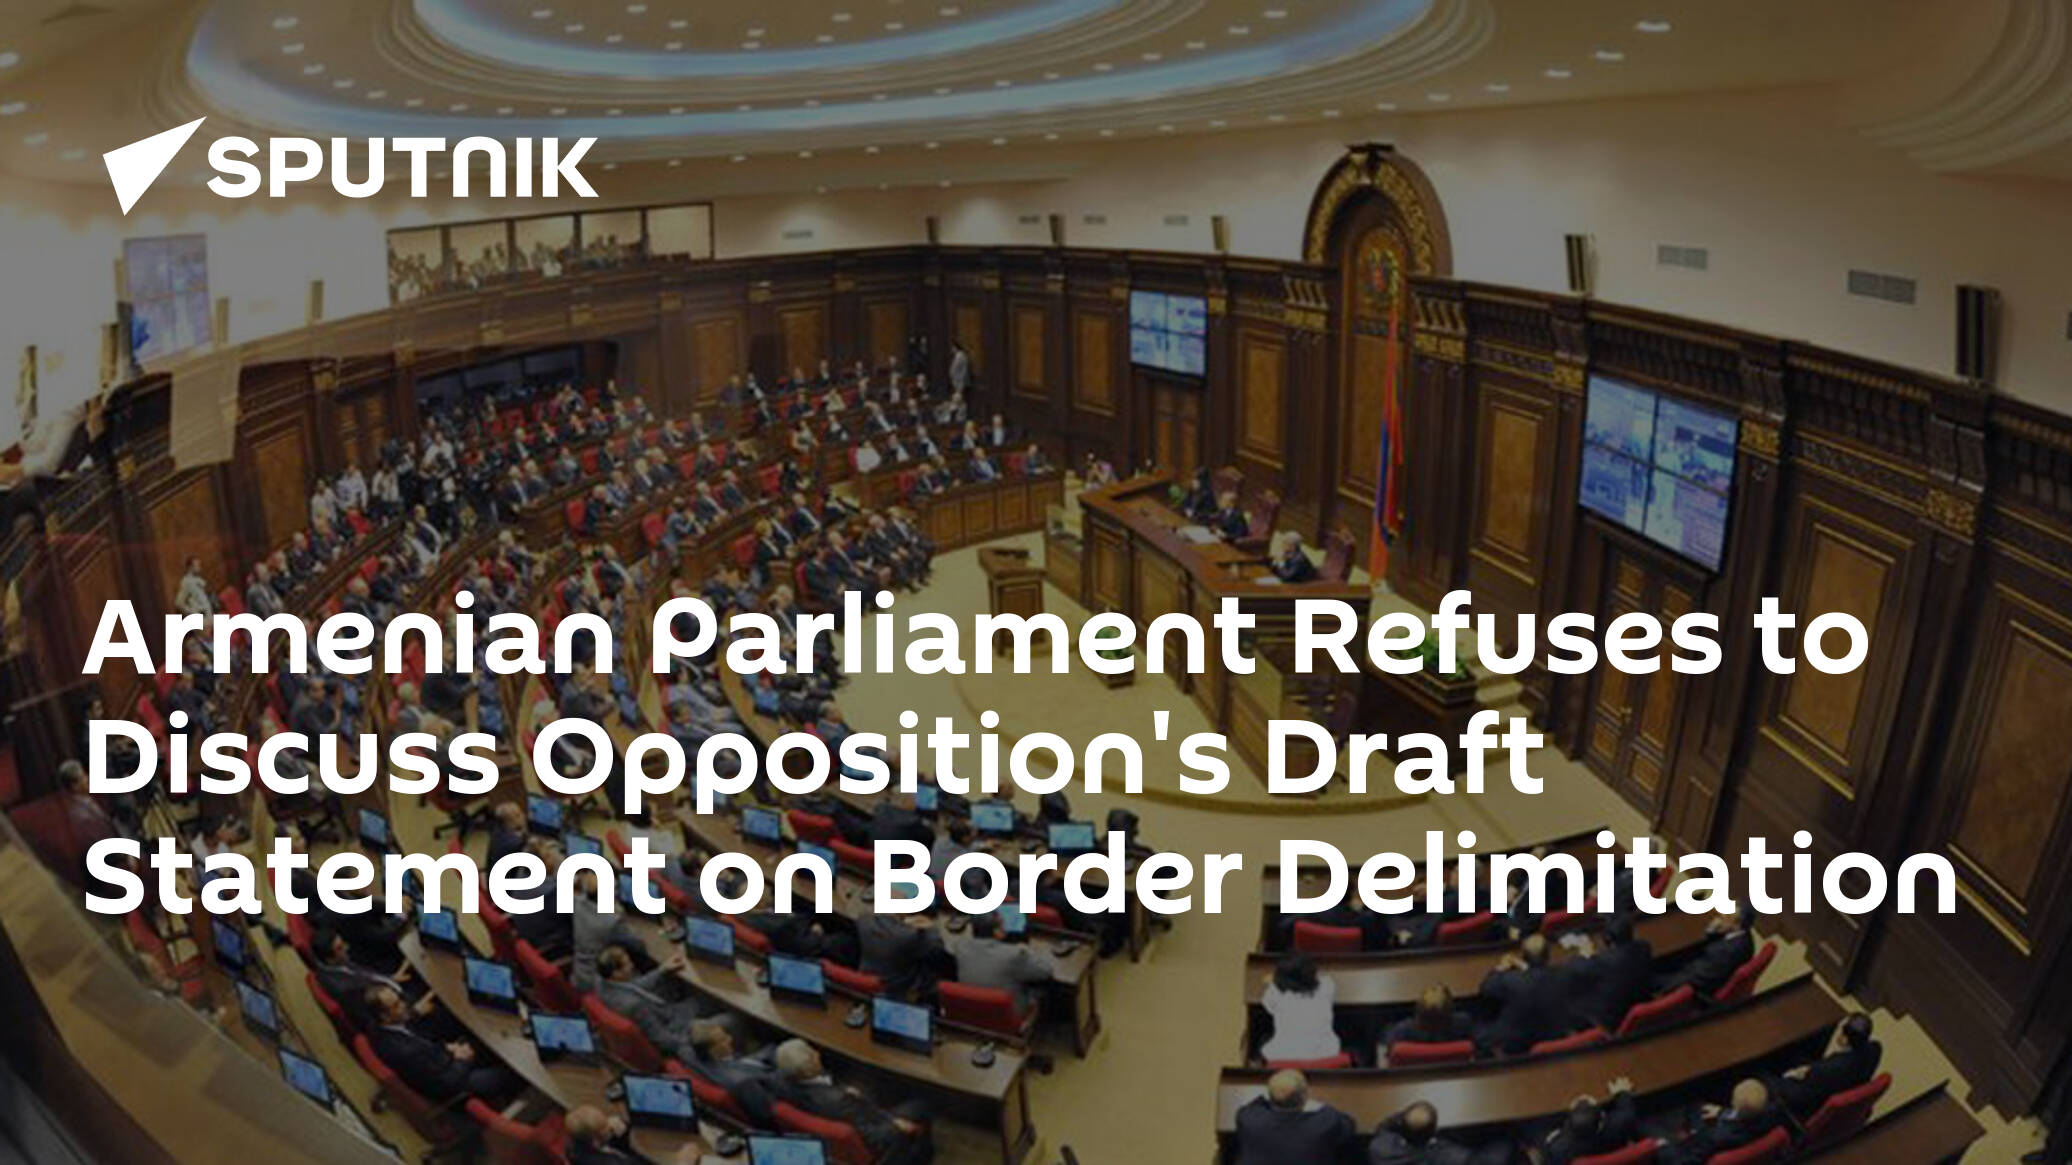 Armenian Parliament Refuses to Discuss Opposition's Draft Statement on Border Delimitation